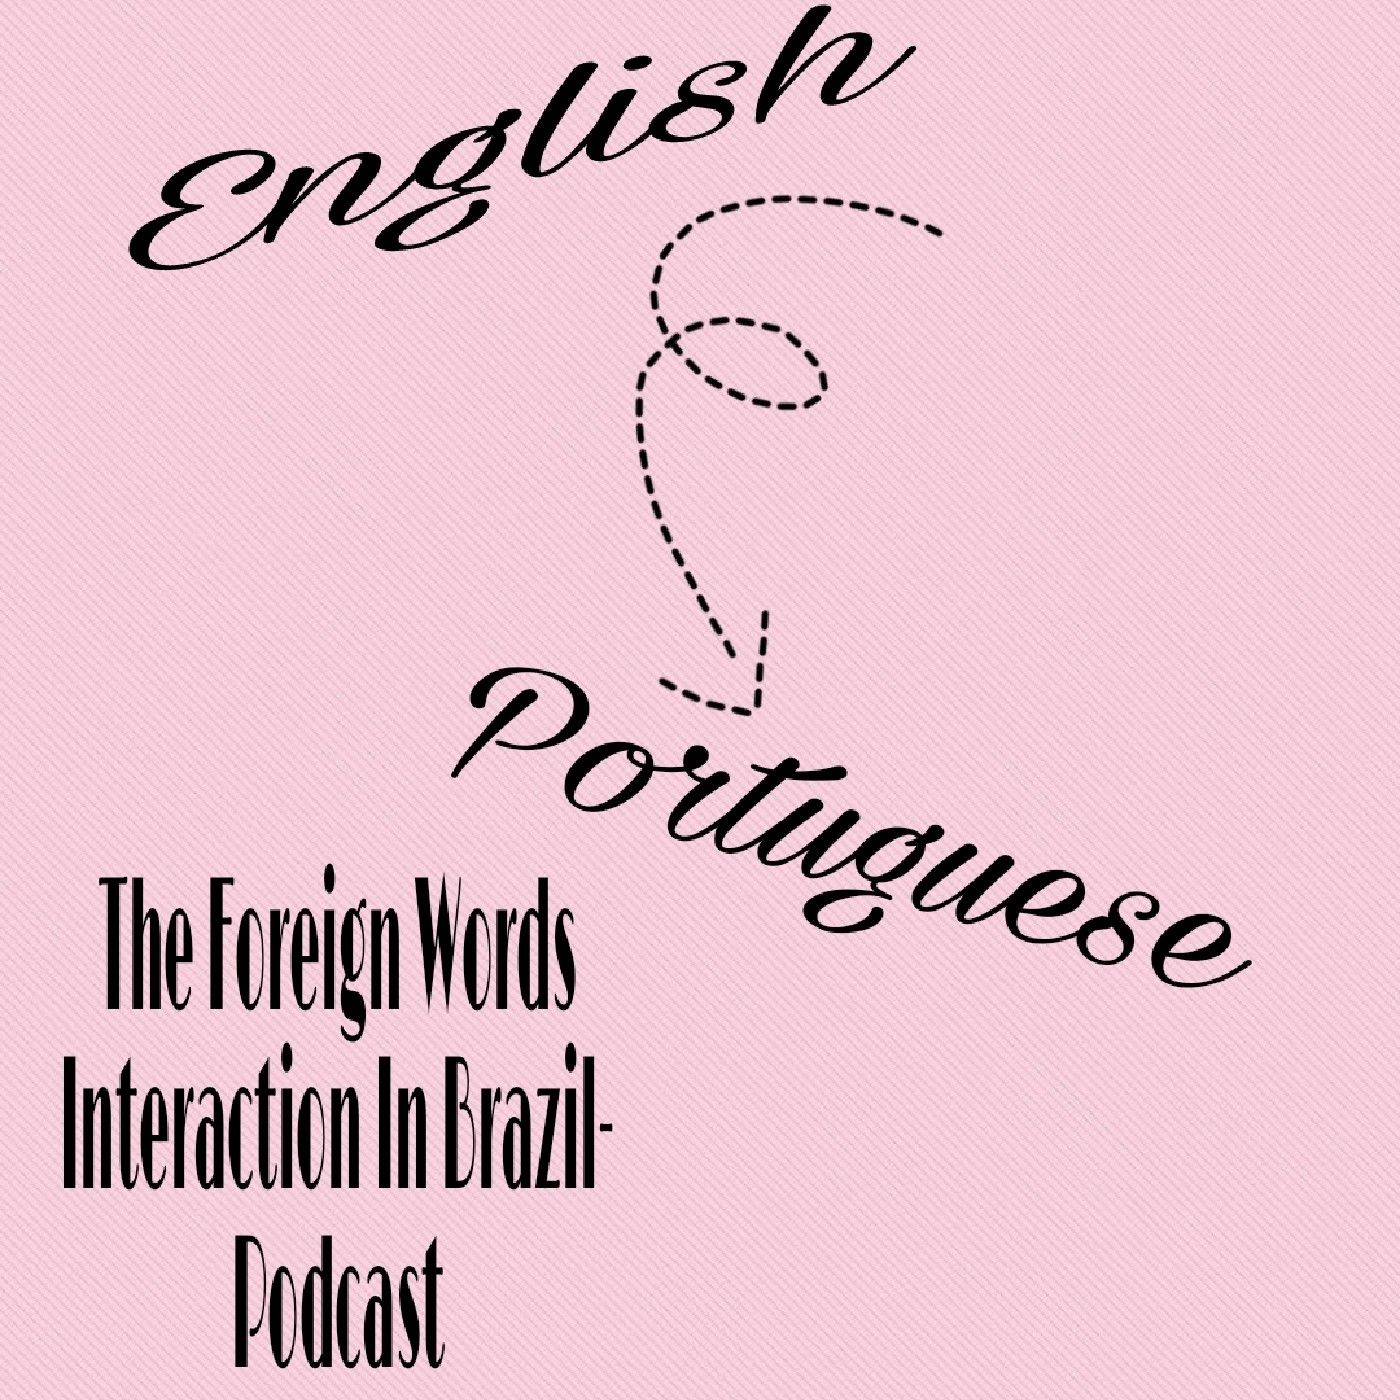 The Foreign Words Interaction In Brazil.